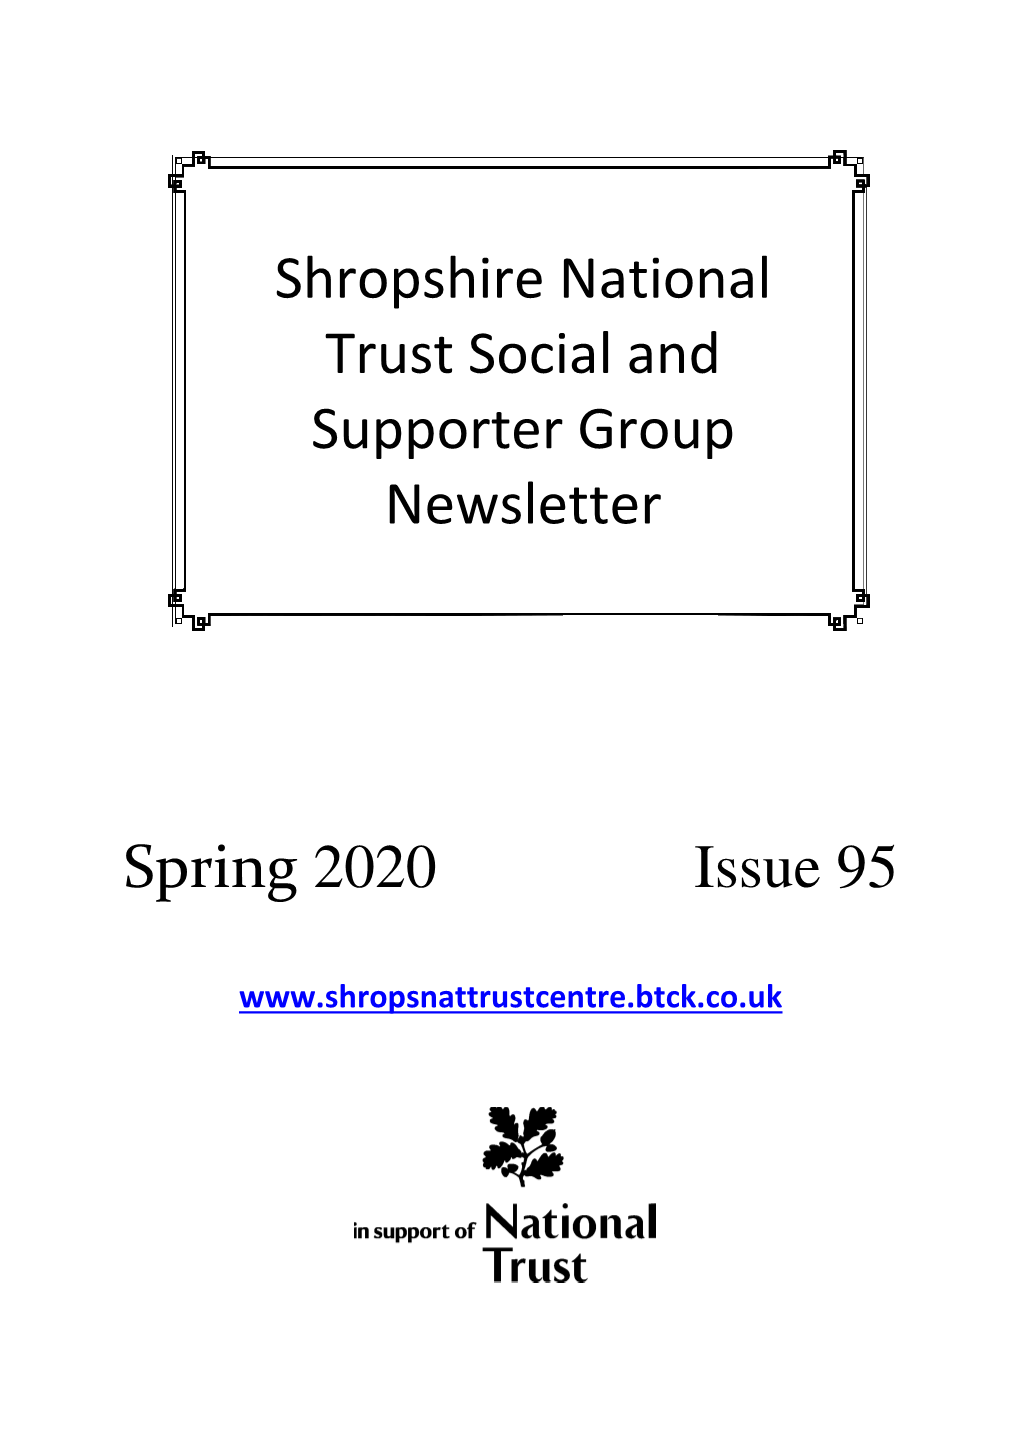 Spring 2020 Issue 95 Shropshire National Trust Social and Supporter Group Newsletter